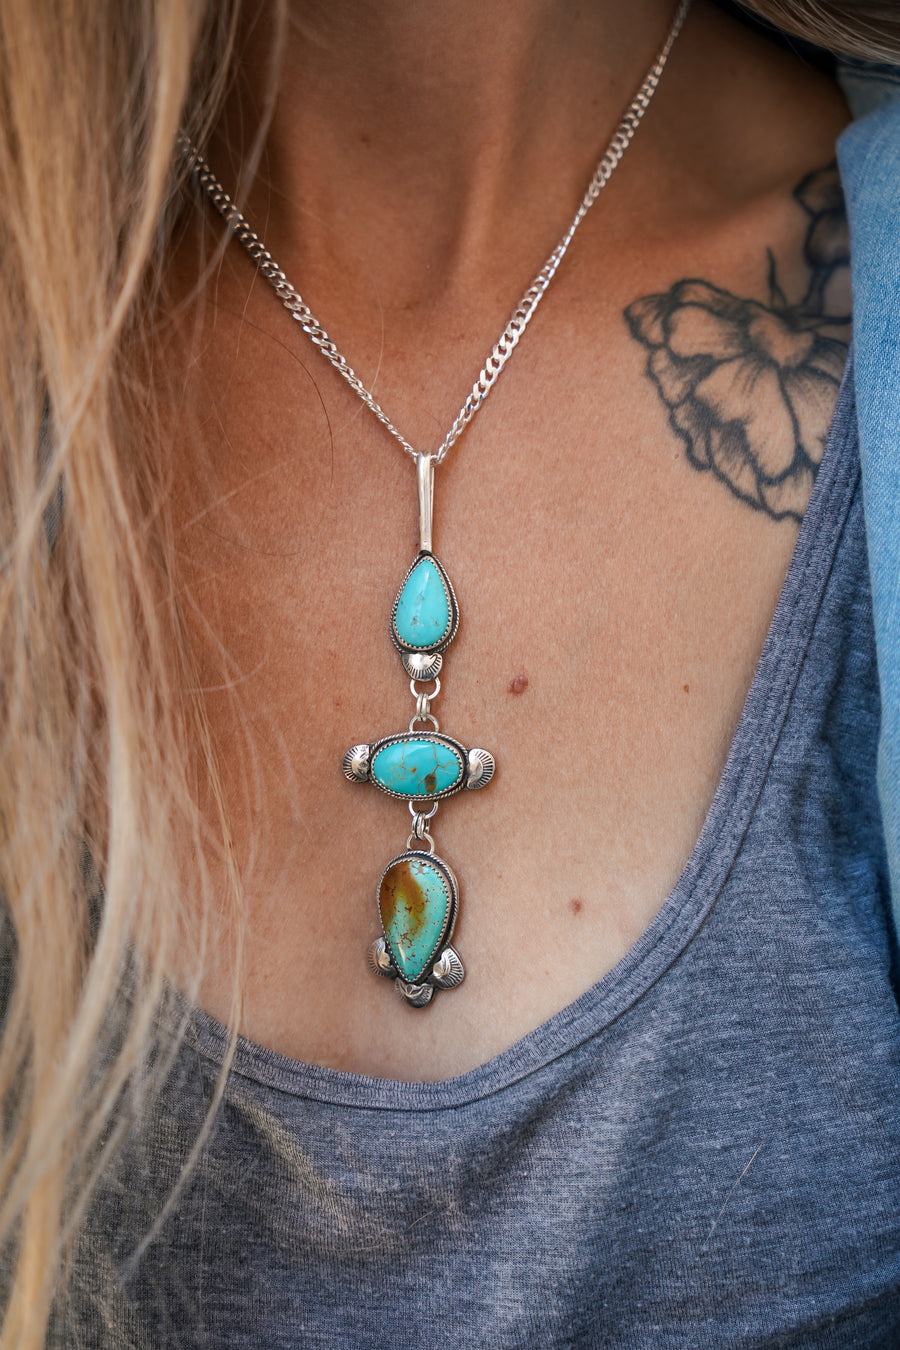 Statement Necklace in Turquoise